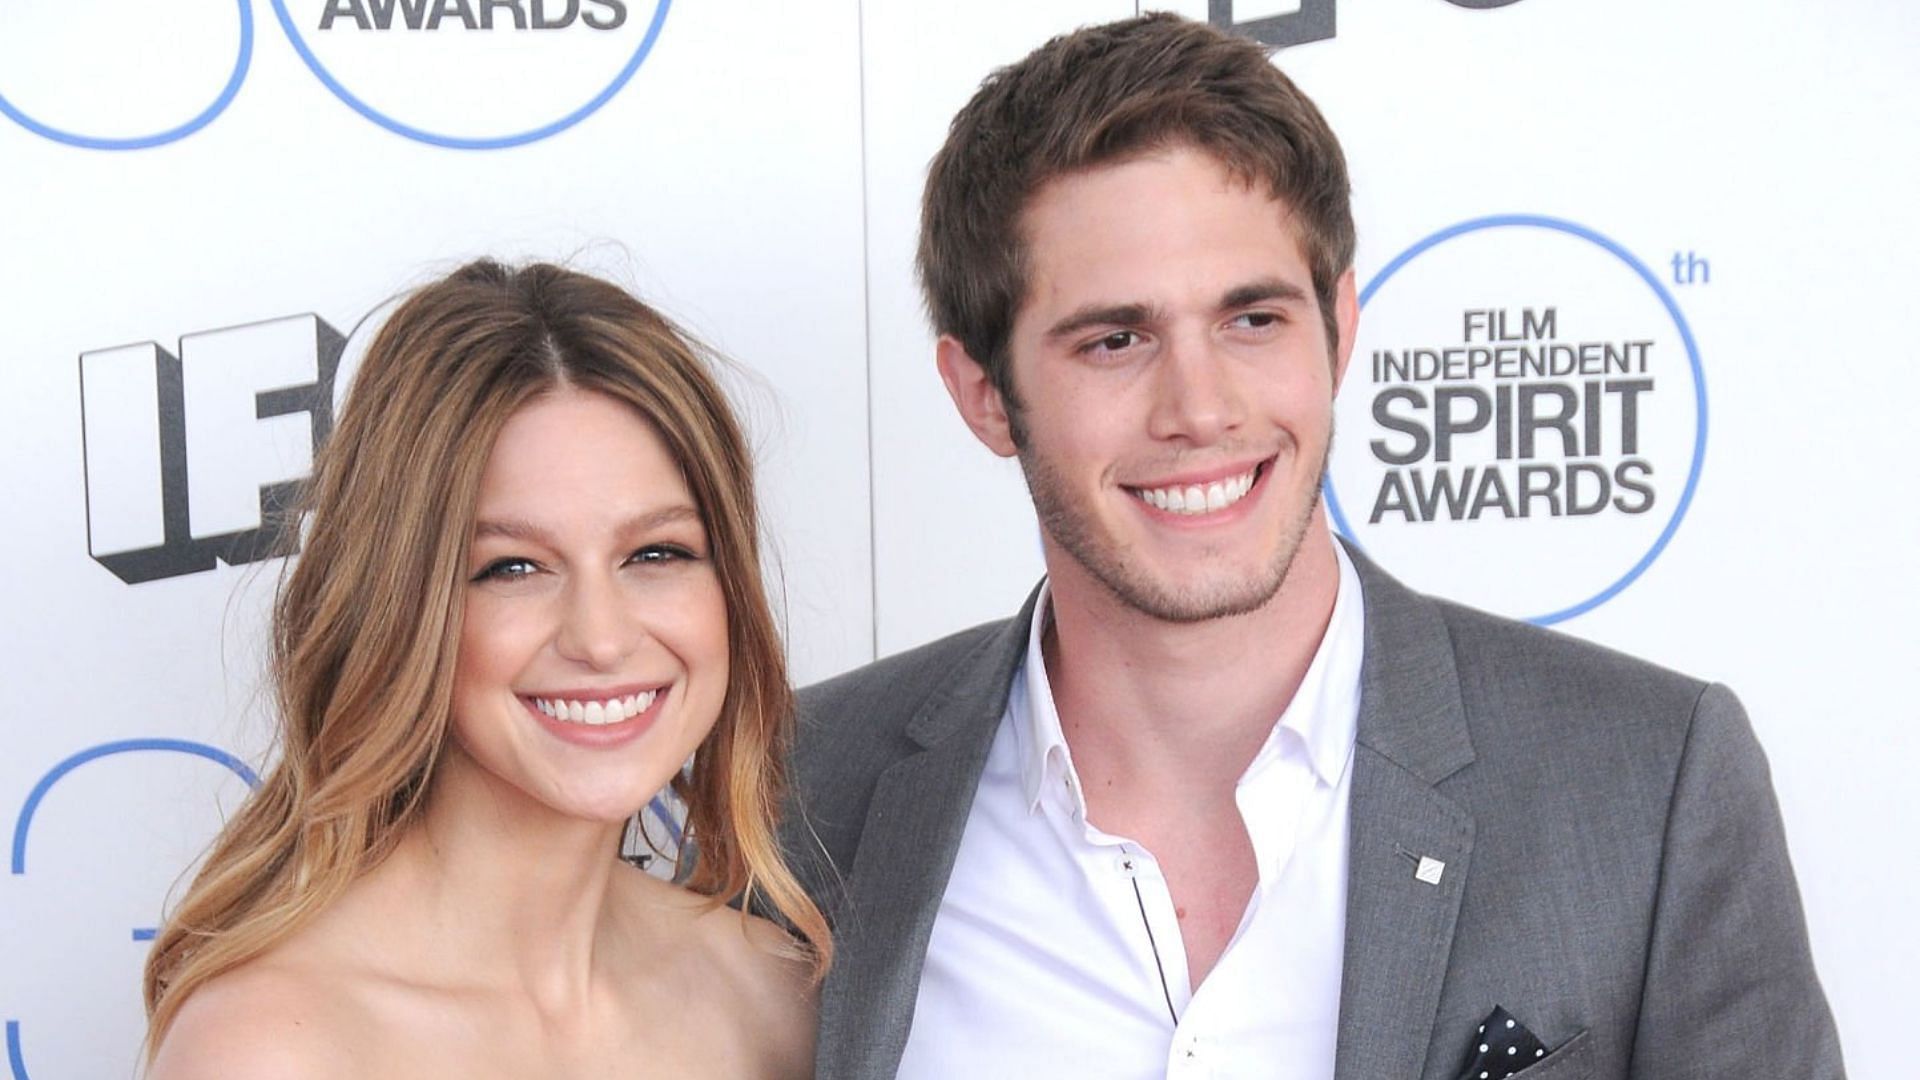 Blake Jenner arrested and booked for DUI (Image via Barry King/Getty Images)